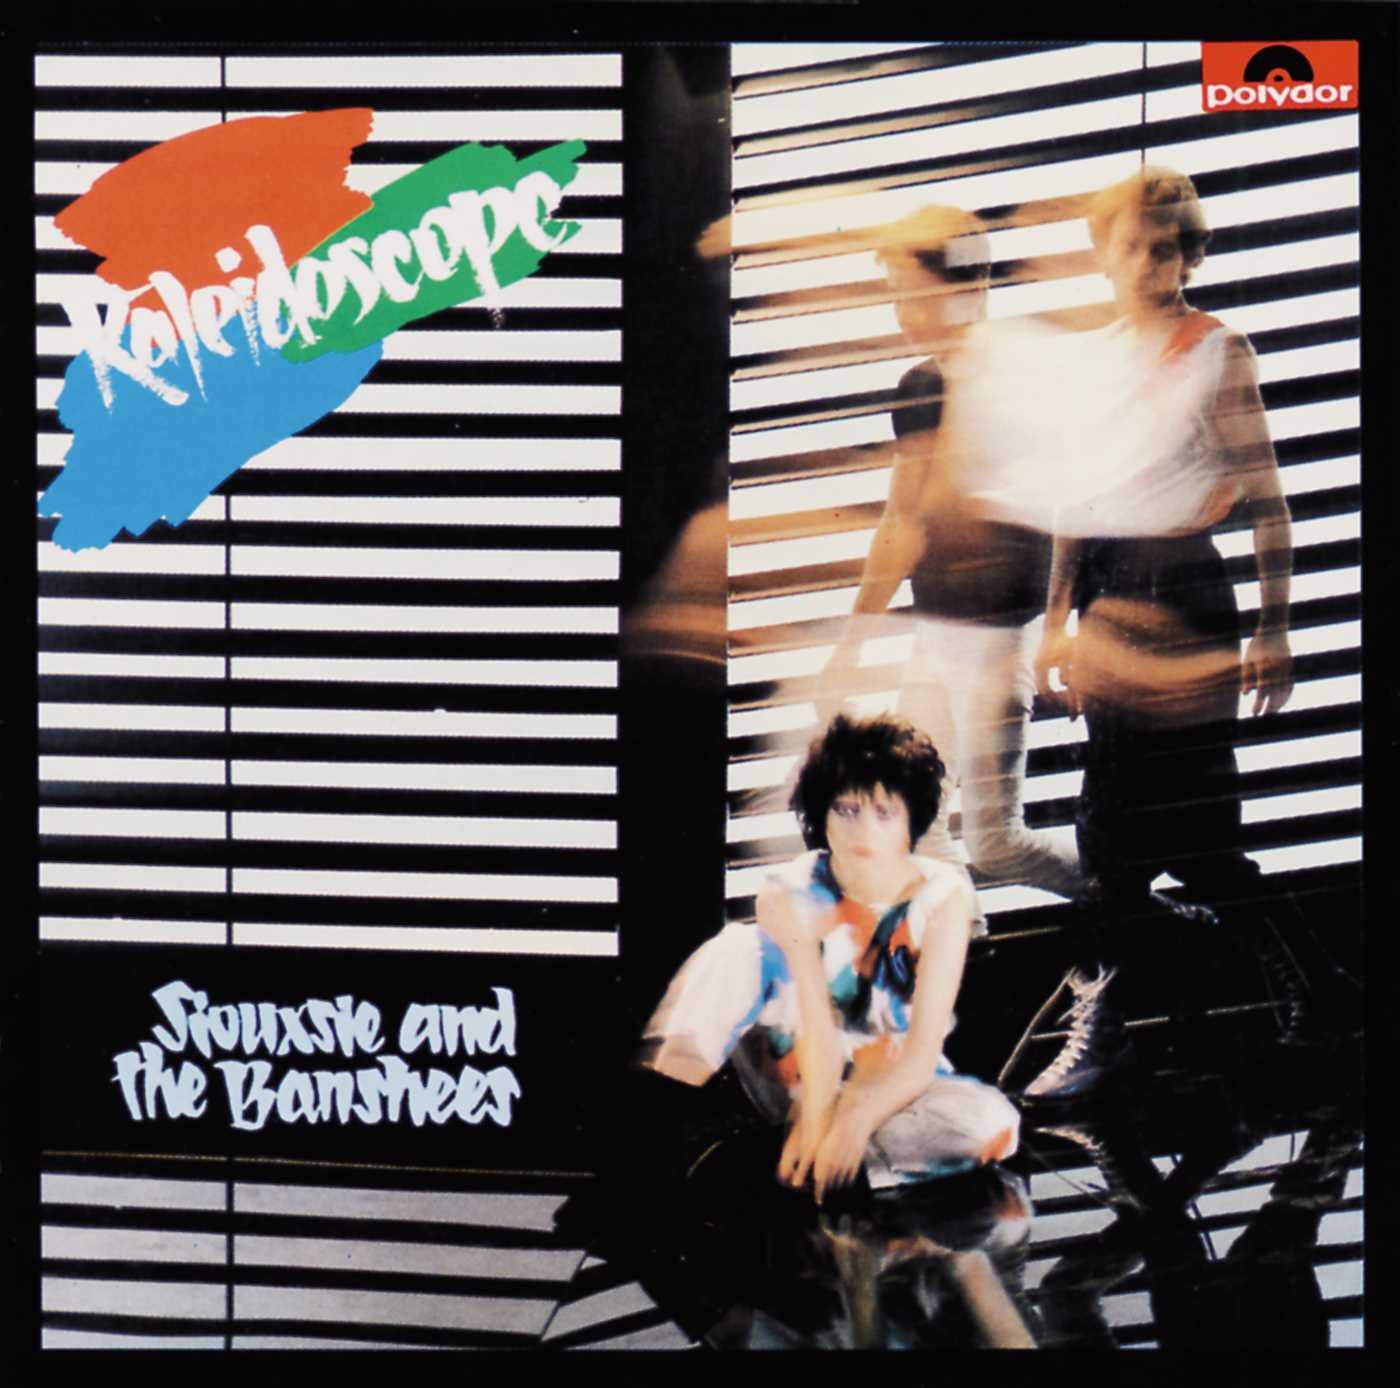 Siouxsie and the Banshees - Kaleidoscope LP